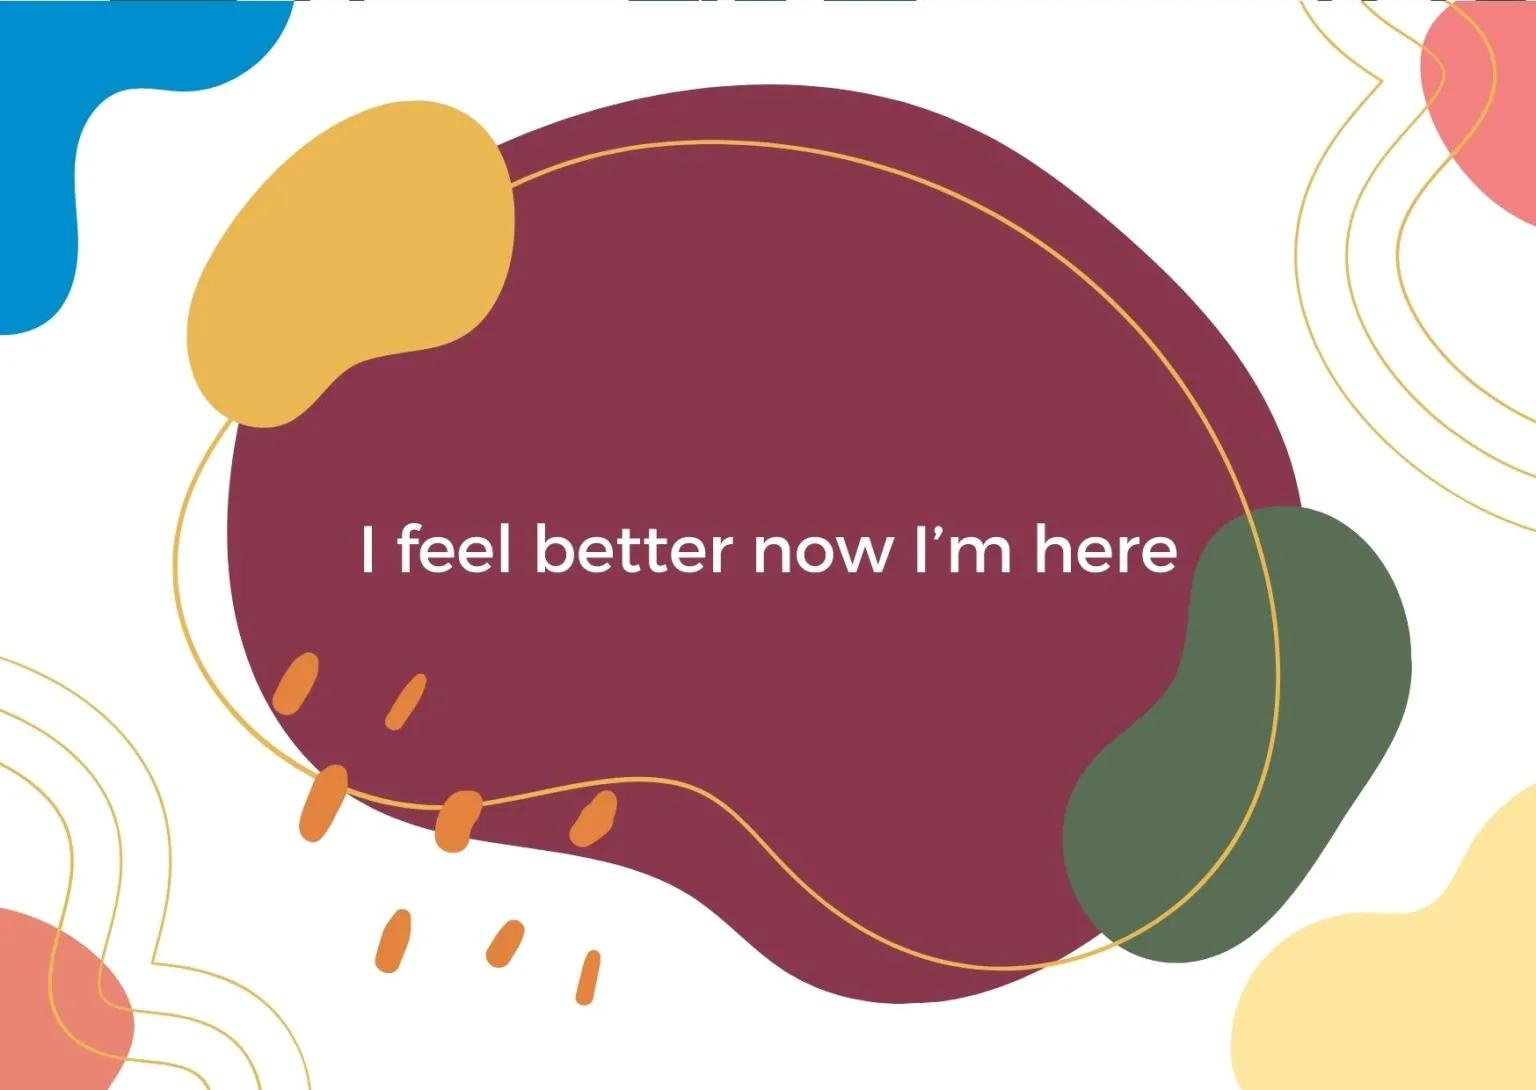 Wallpaper illustrated with text: I feel better now I'm here